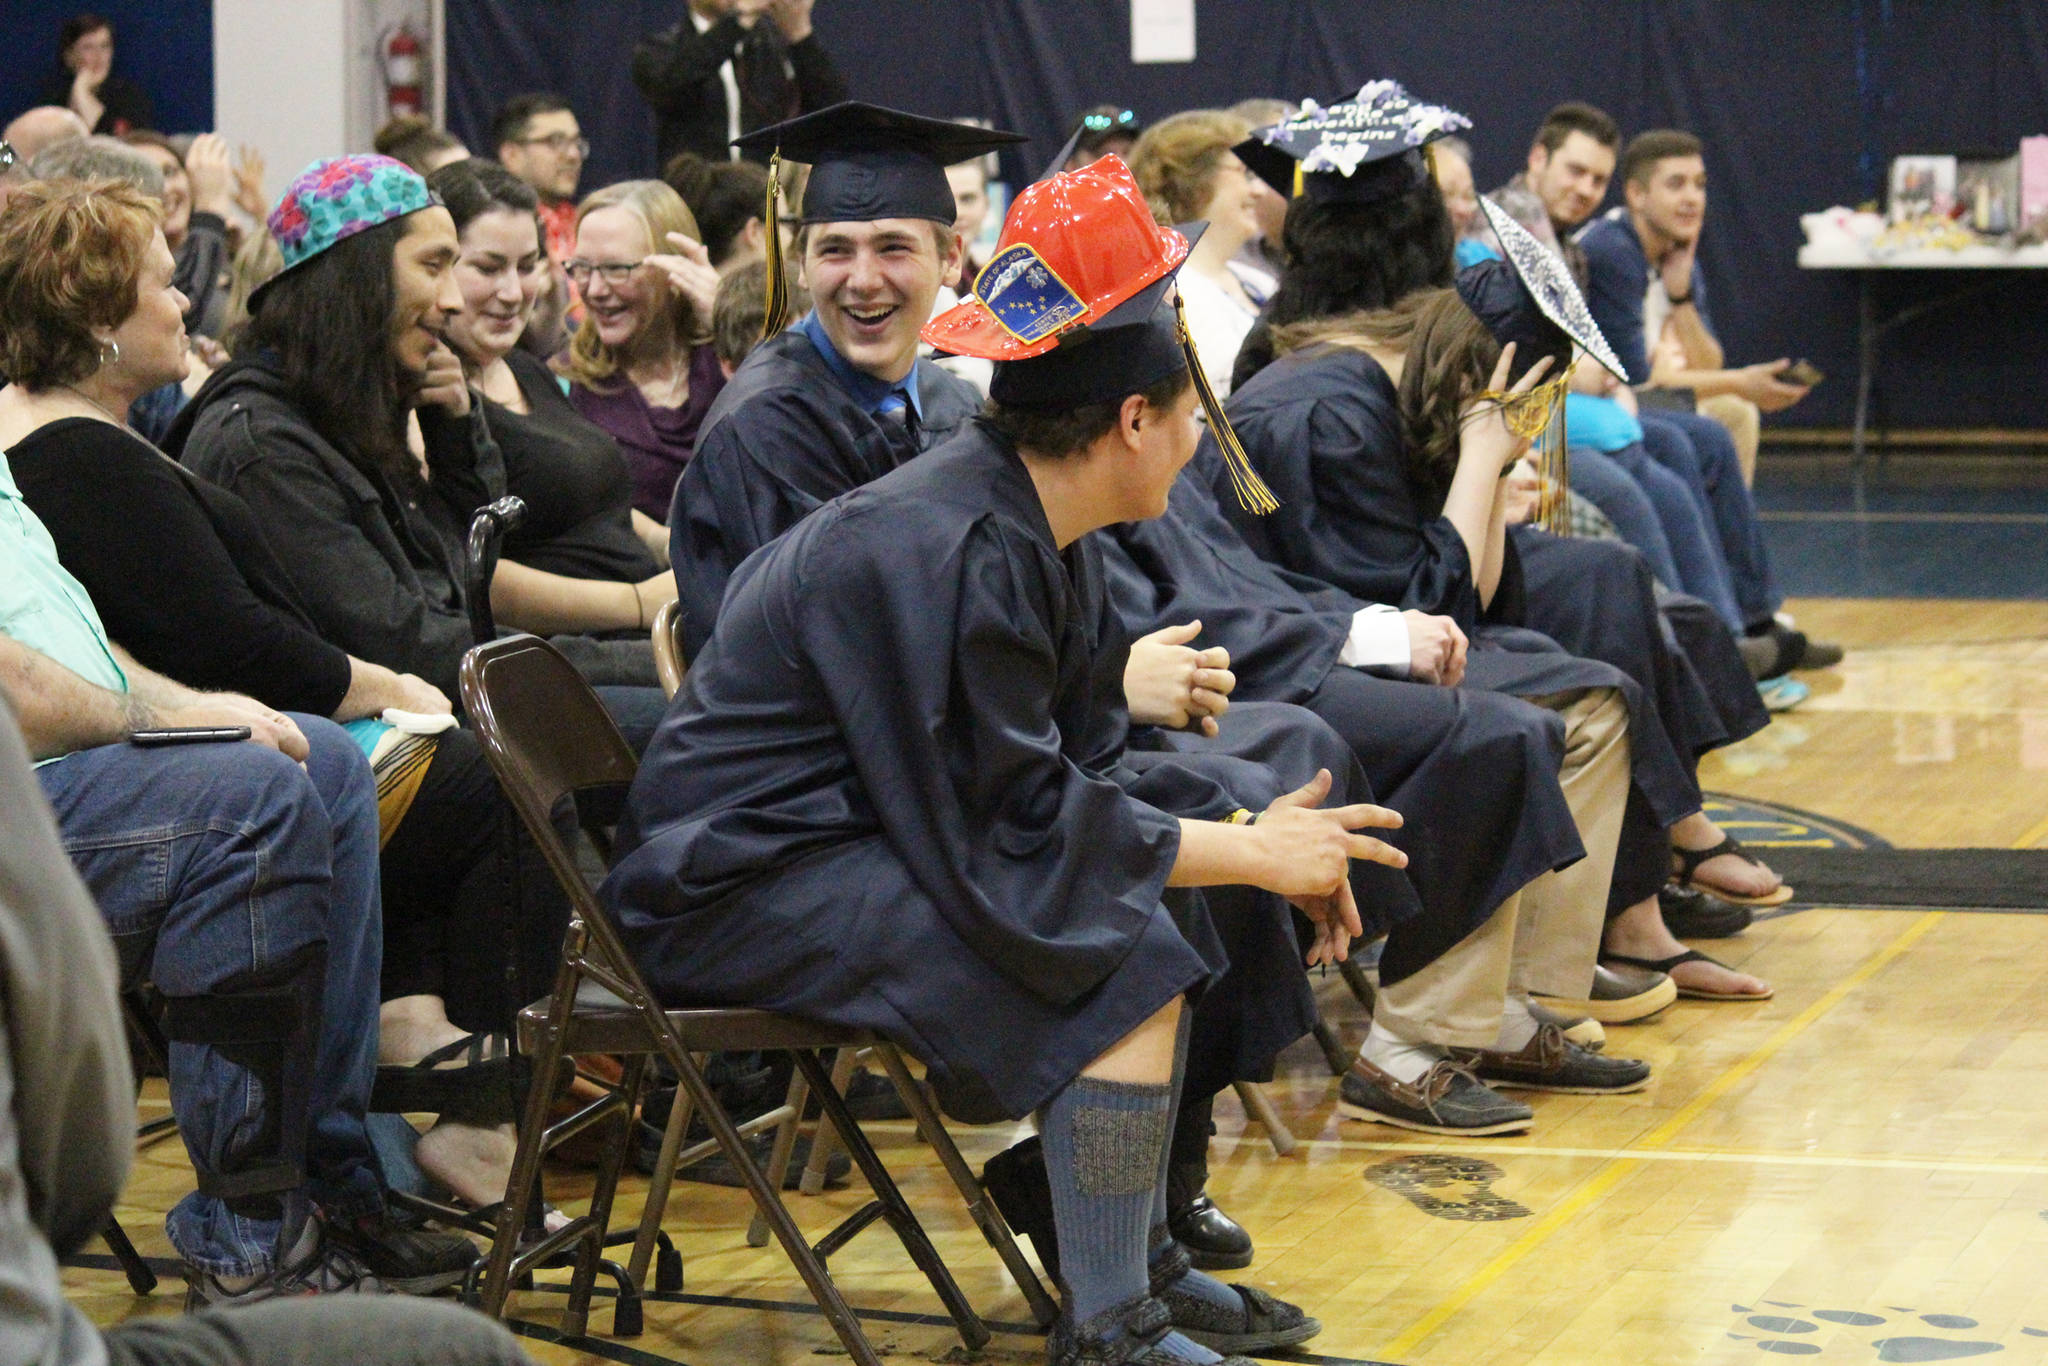 Members of the Ninilchik School graduating class of 2018 laugh and react as one of the speakers at their Monday, May 21, 2018 ceremony walks back to his seat at the school in Ninilchik, Alaska. The speaker accidentally took a page of salutatorian Chelsea Oberle-Lozano’s speech from the podium after finishing his own. (Photo by Megan Pacer/Homer News)